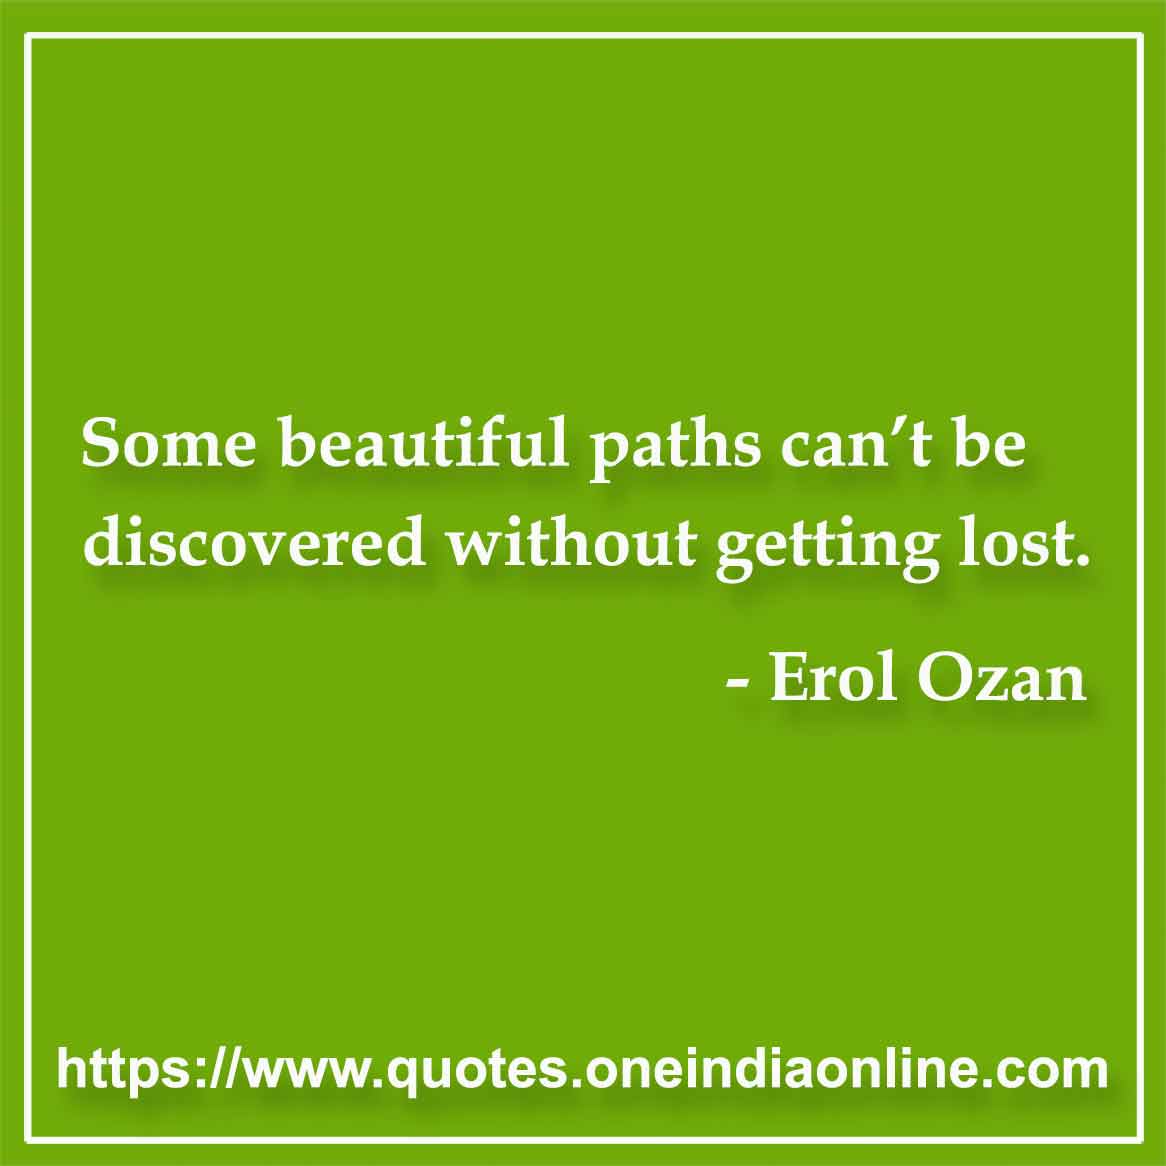 Some beautiful paths can’t be discovered without getting lost.

-  by Erol Ozan